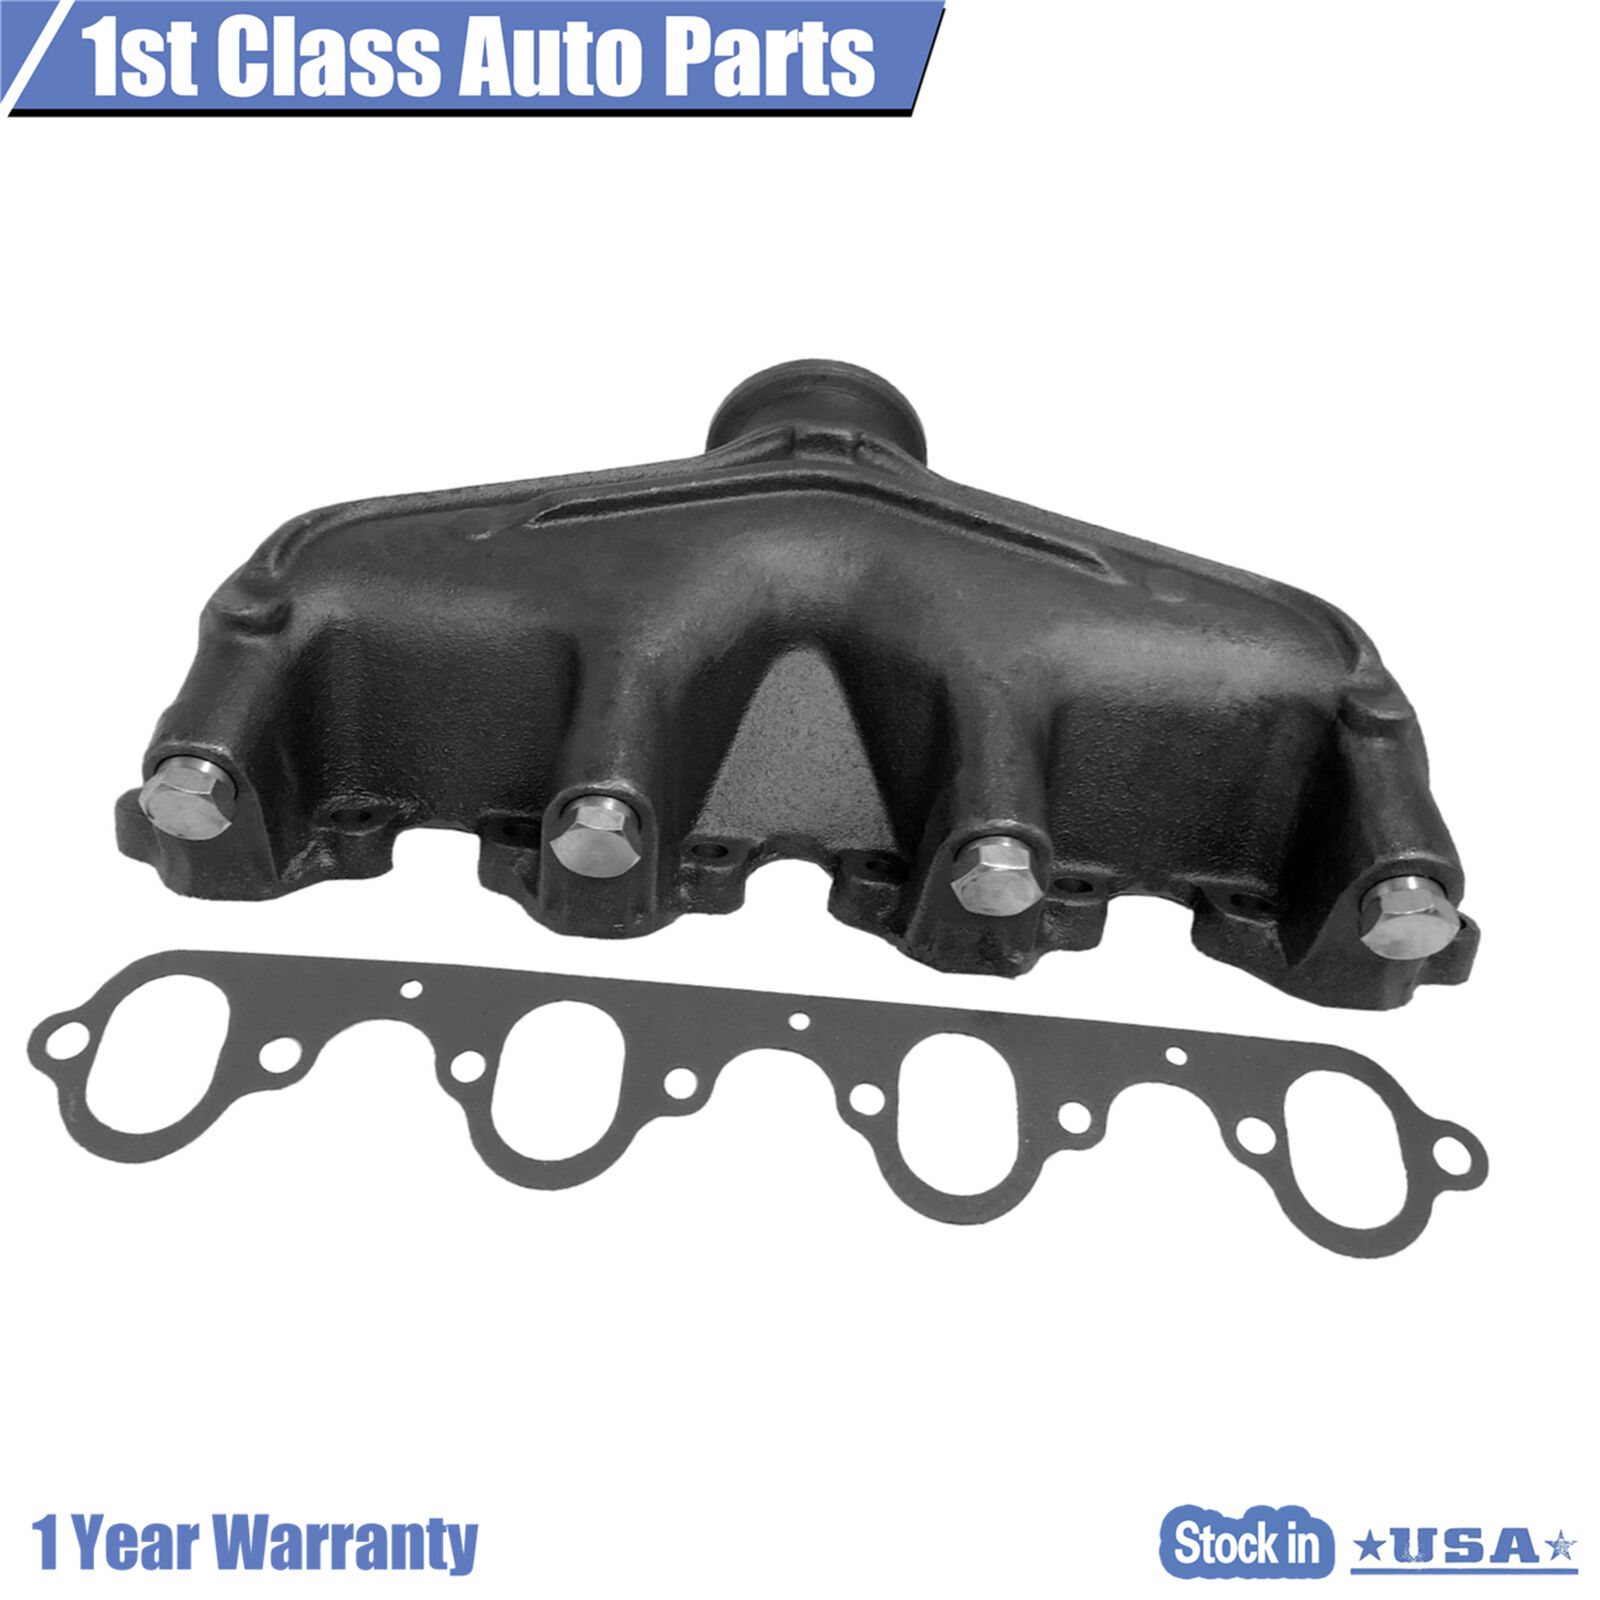 Exhaust Manifold For 1980-1991 Ford B600 B700 C600 C700 F600 F700 674-168